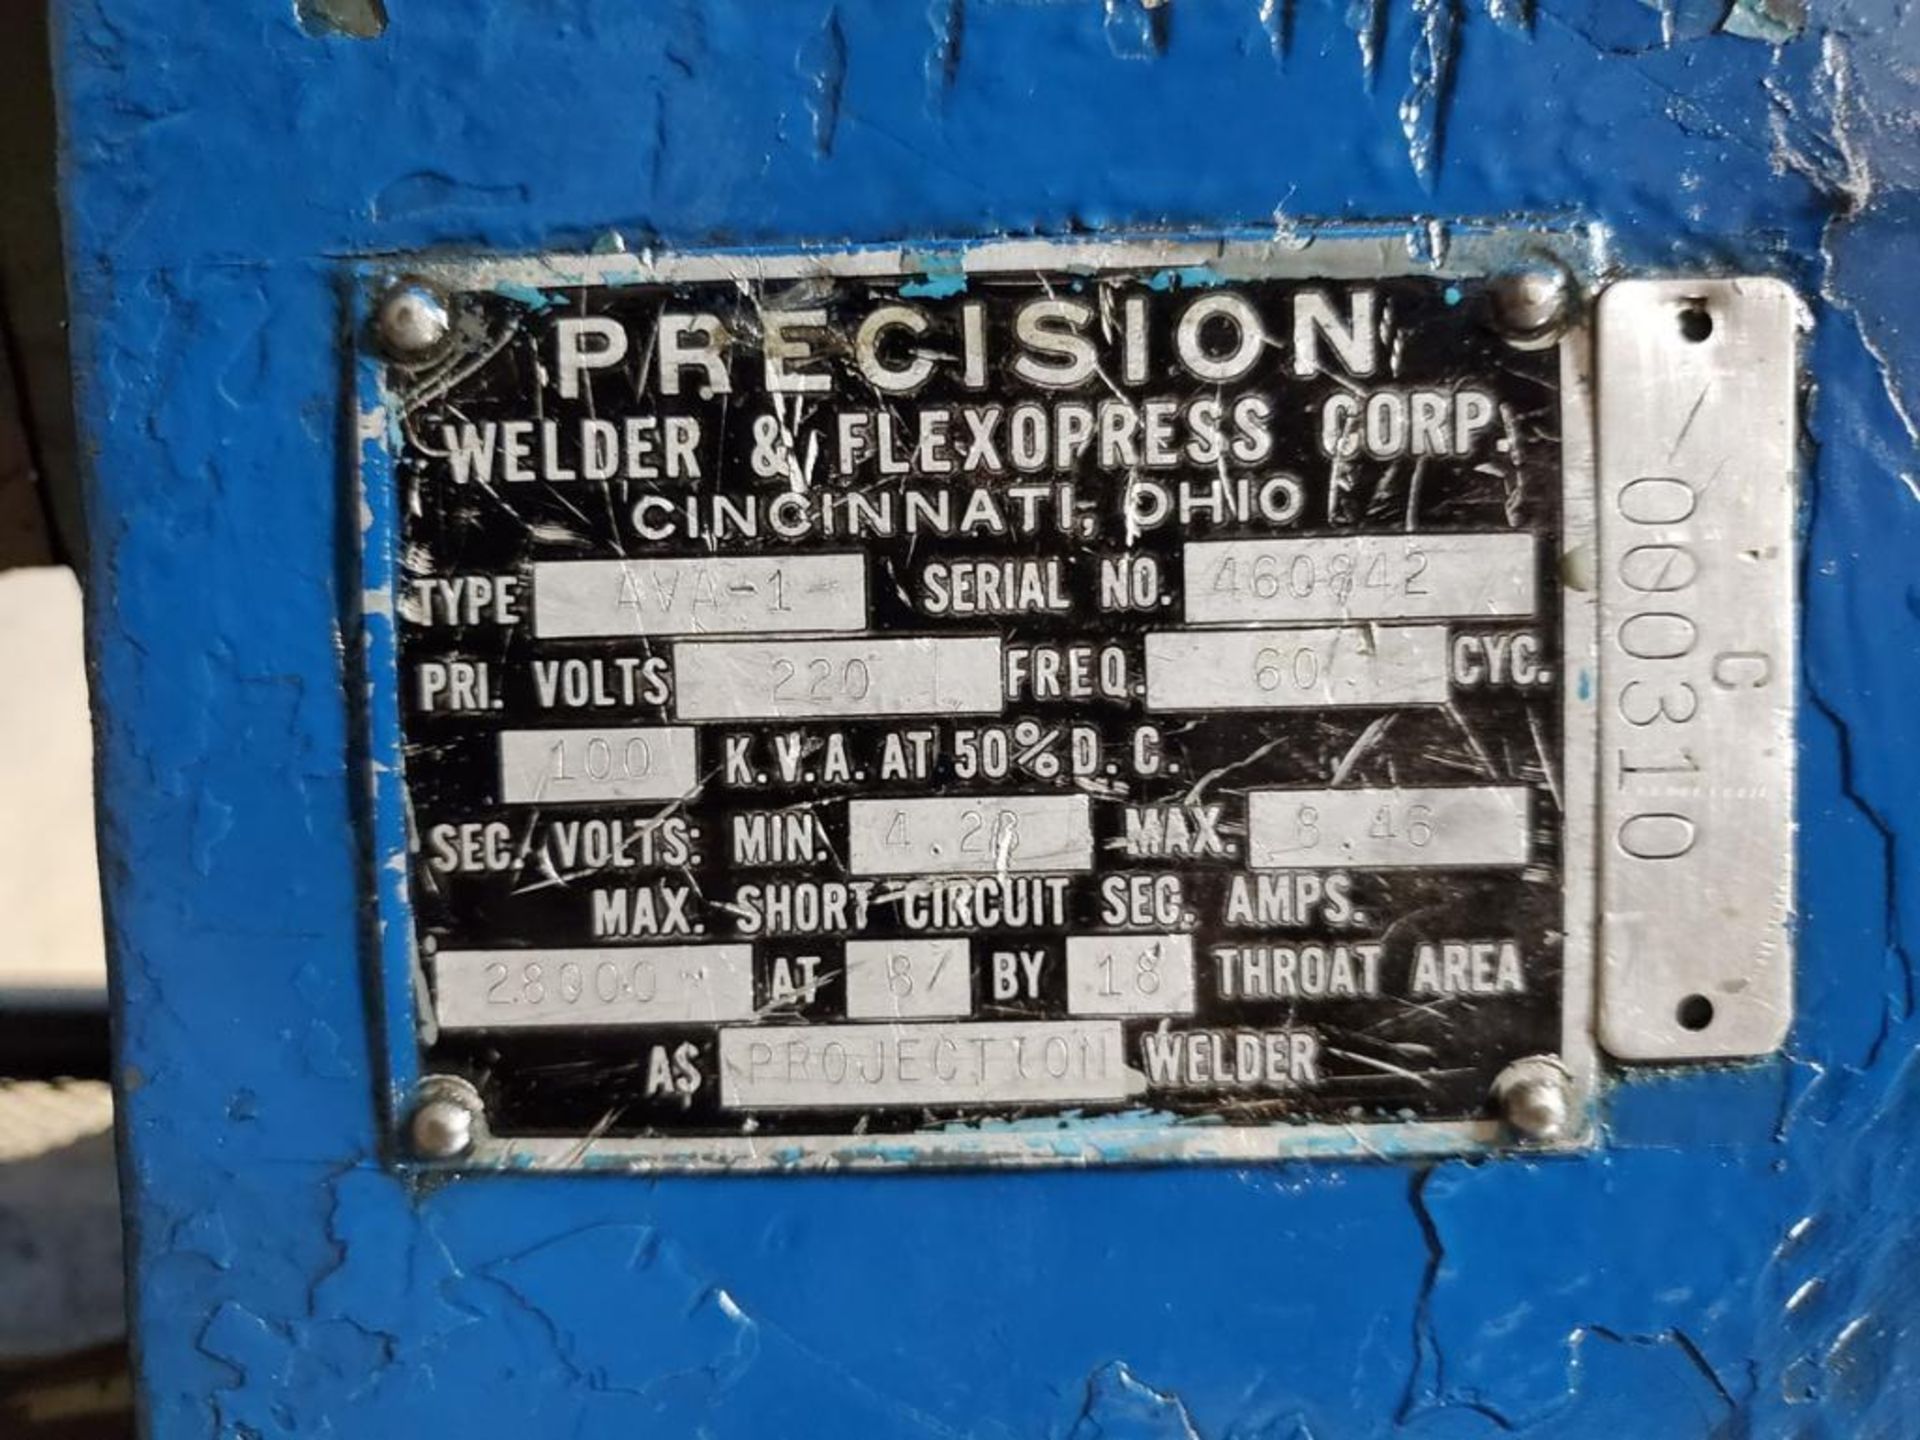 Precision Model AVA-1 Projection Welder - Image 6 of 6